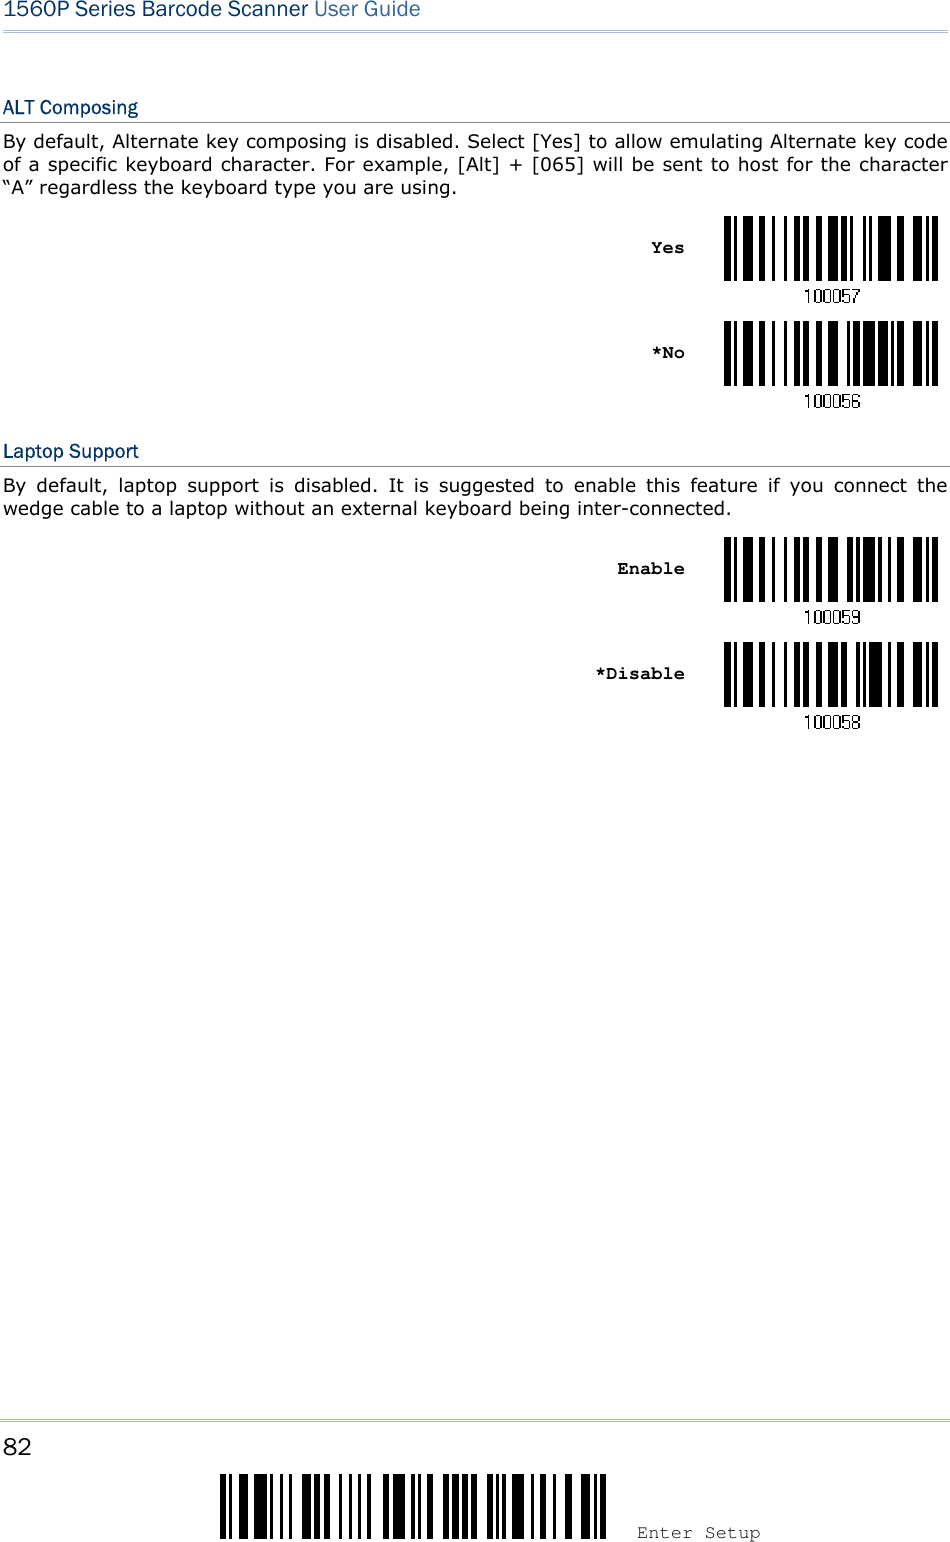 82 Enter Setup 1560P Series Barcode Scanner User Guide ALT Composing By default, Alternate key composing is disabled. Select [Yes] to allow emulating Alternate key code of a specific keyboard character. For example, [Alt] + [065] will be sent to host for the character “A” regardless the keyboard type you are using. Yes *NoLaptop Support By  default,  laptop  support  is  disabled.  It  is  suggested  to  enable  this  feature  if  you  connect  the wedge cable to a laptop without an external keyboard being inter-connected. Enable *Disable